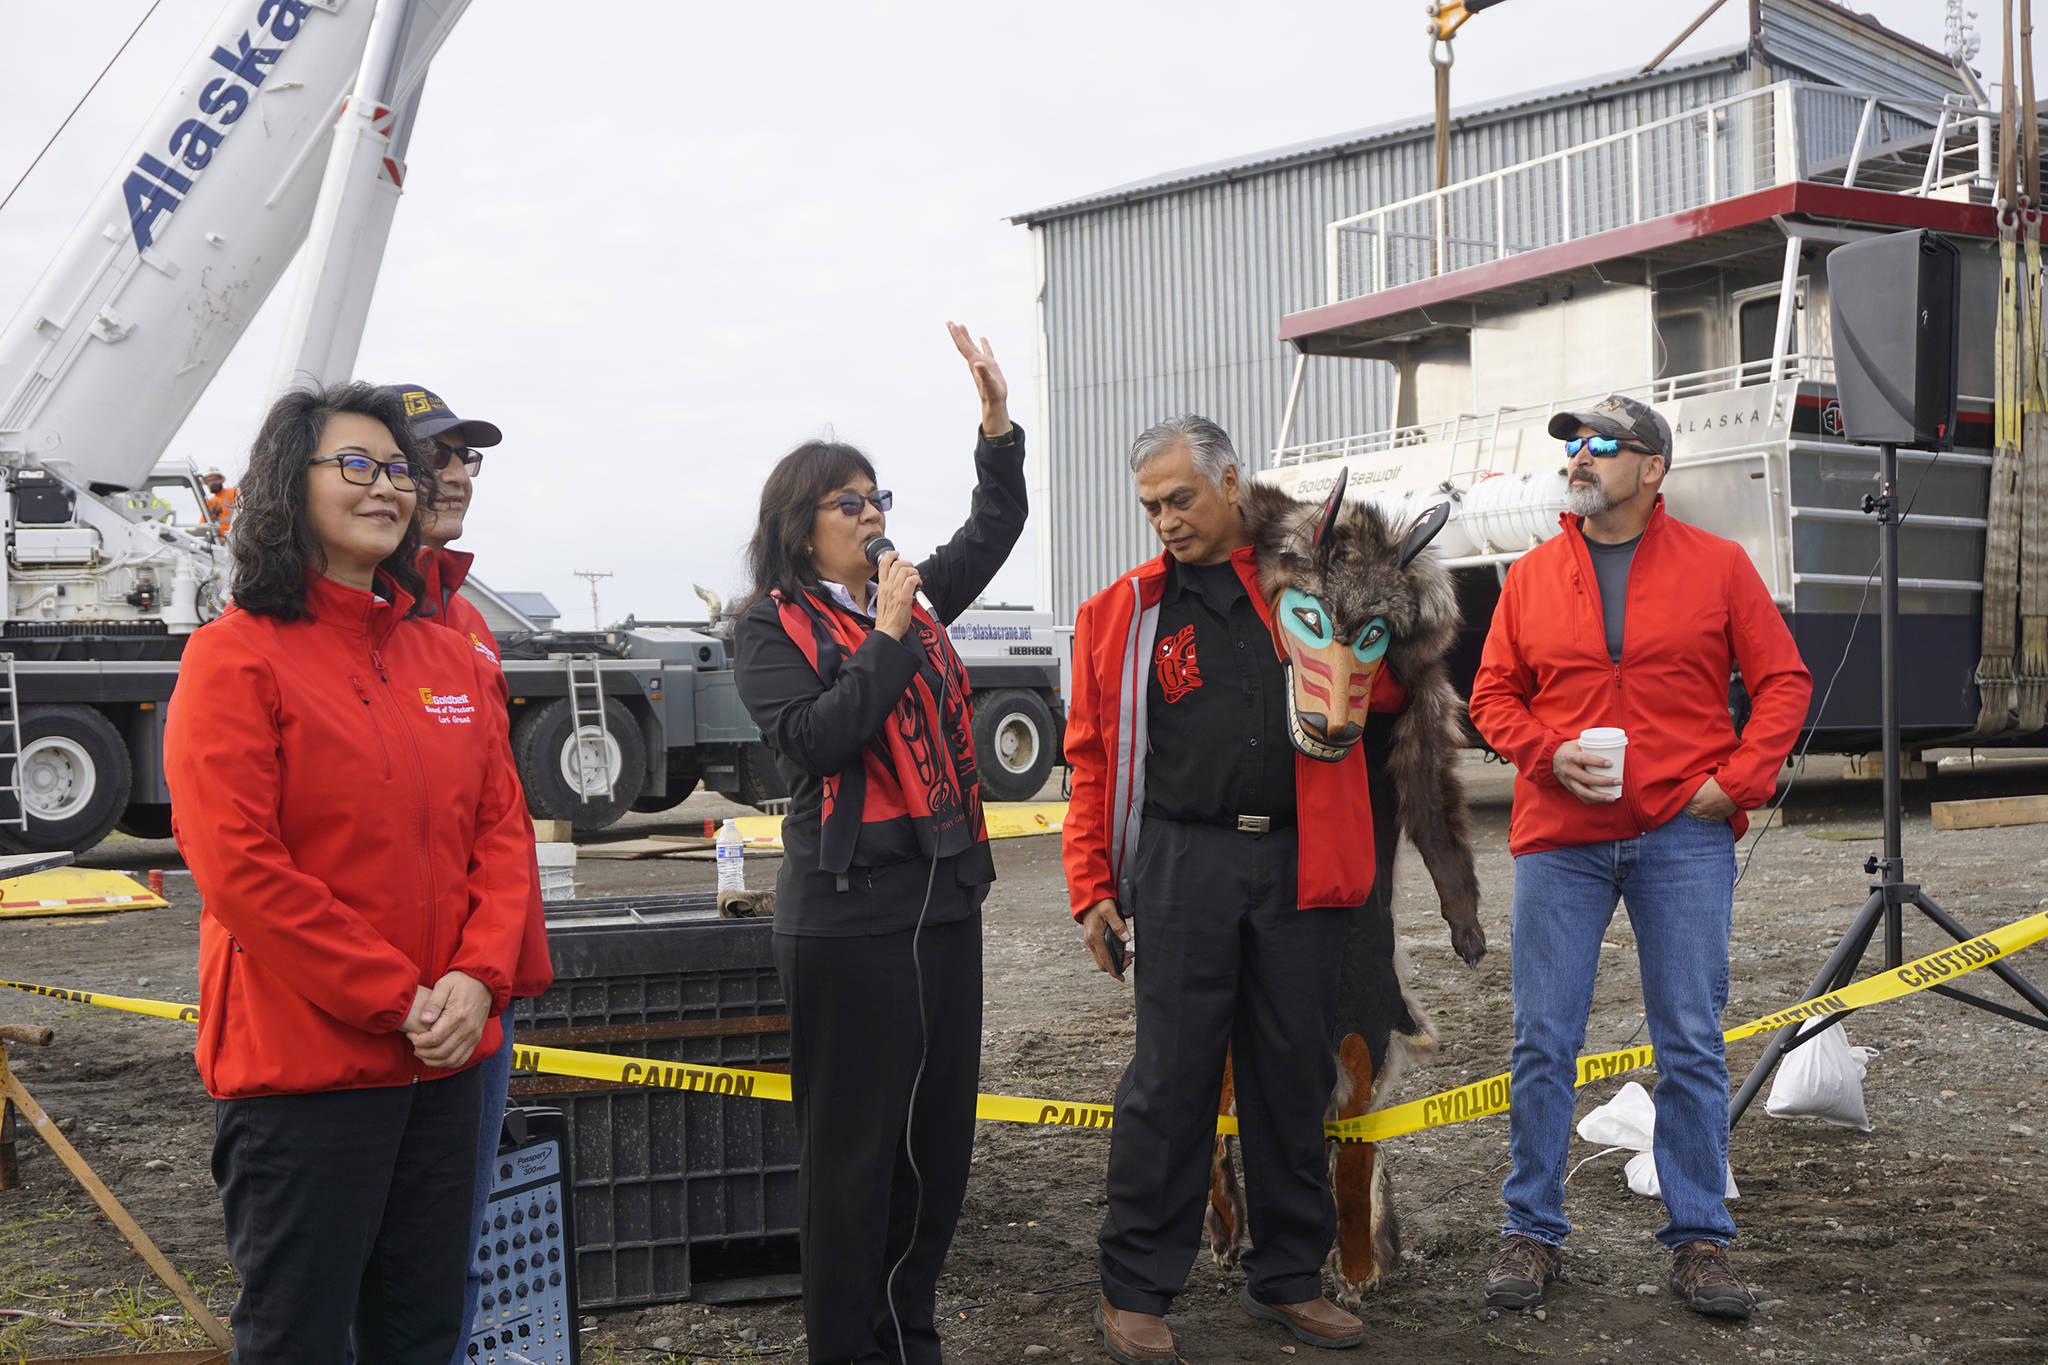 Katherine Eldemar, vice-chair of the board of directors of Goldbelt Inc., speaks at the launch of the Goldbelt Seawolf on Tuesday, Sept. 10, 2019, at the Northern Enterprises Boatyard in Homer, Alaska. (Photo by Michael Armstrong/Homer News)